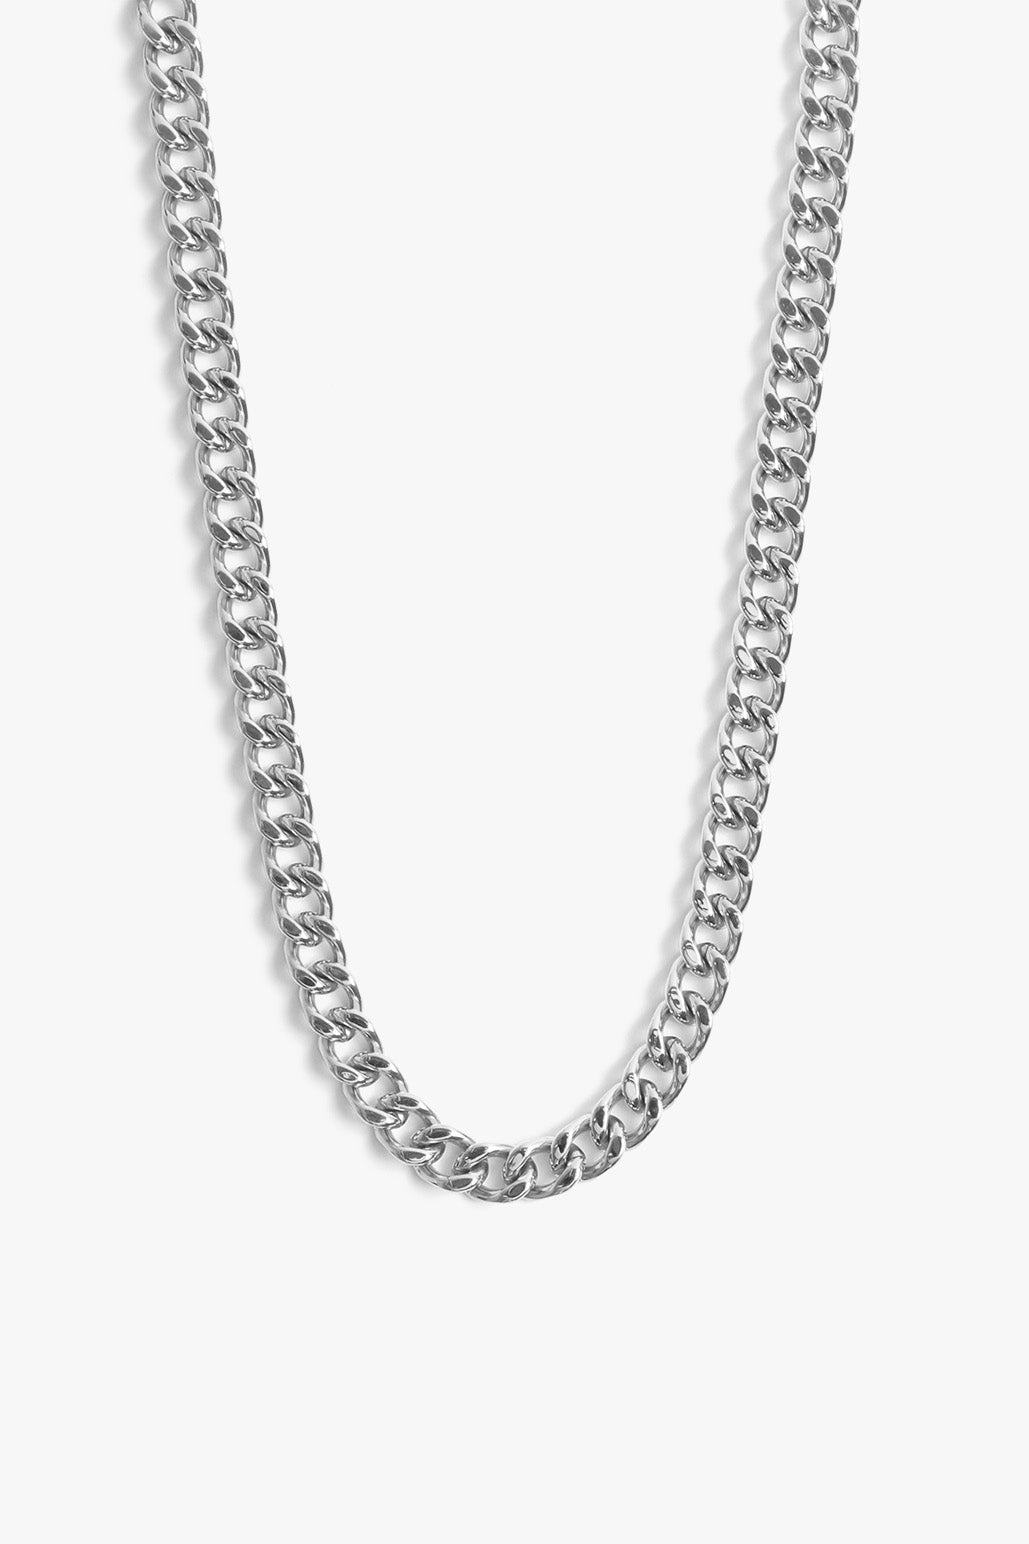 Marrin Costello Jewelry Queens Chain chunky statement cuban link chain necklace with lobster clasp closure. Waterproof, sustainable, hypoallergenic. Polished stainless steel.